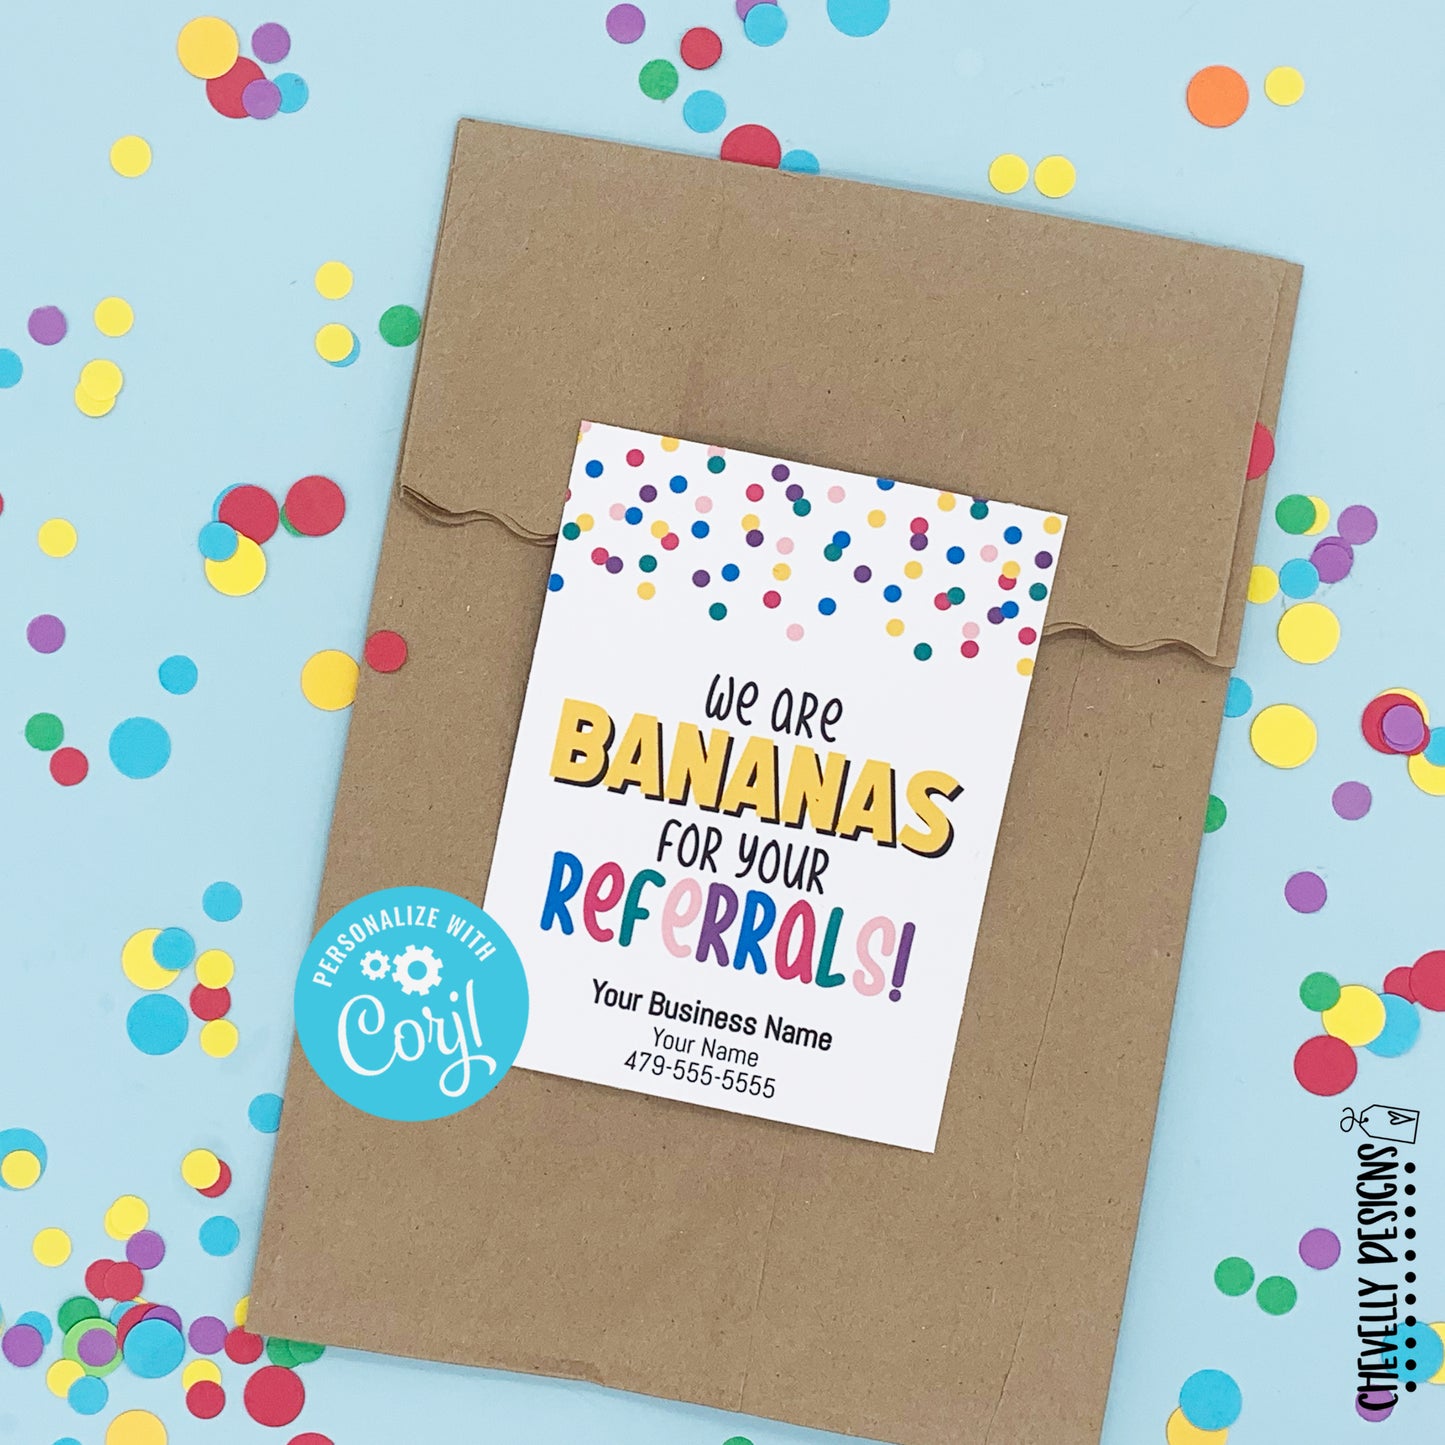 Editable - We Are Bananas for Your Referrals - Gift Tags for Business Marketing - Printable - Digital File